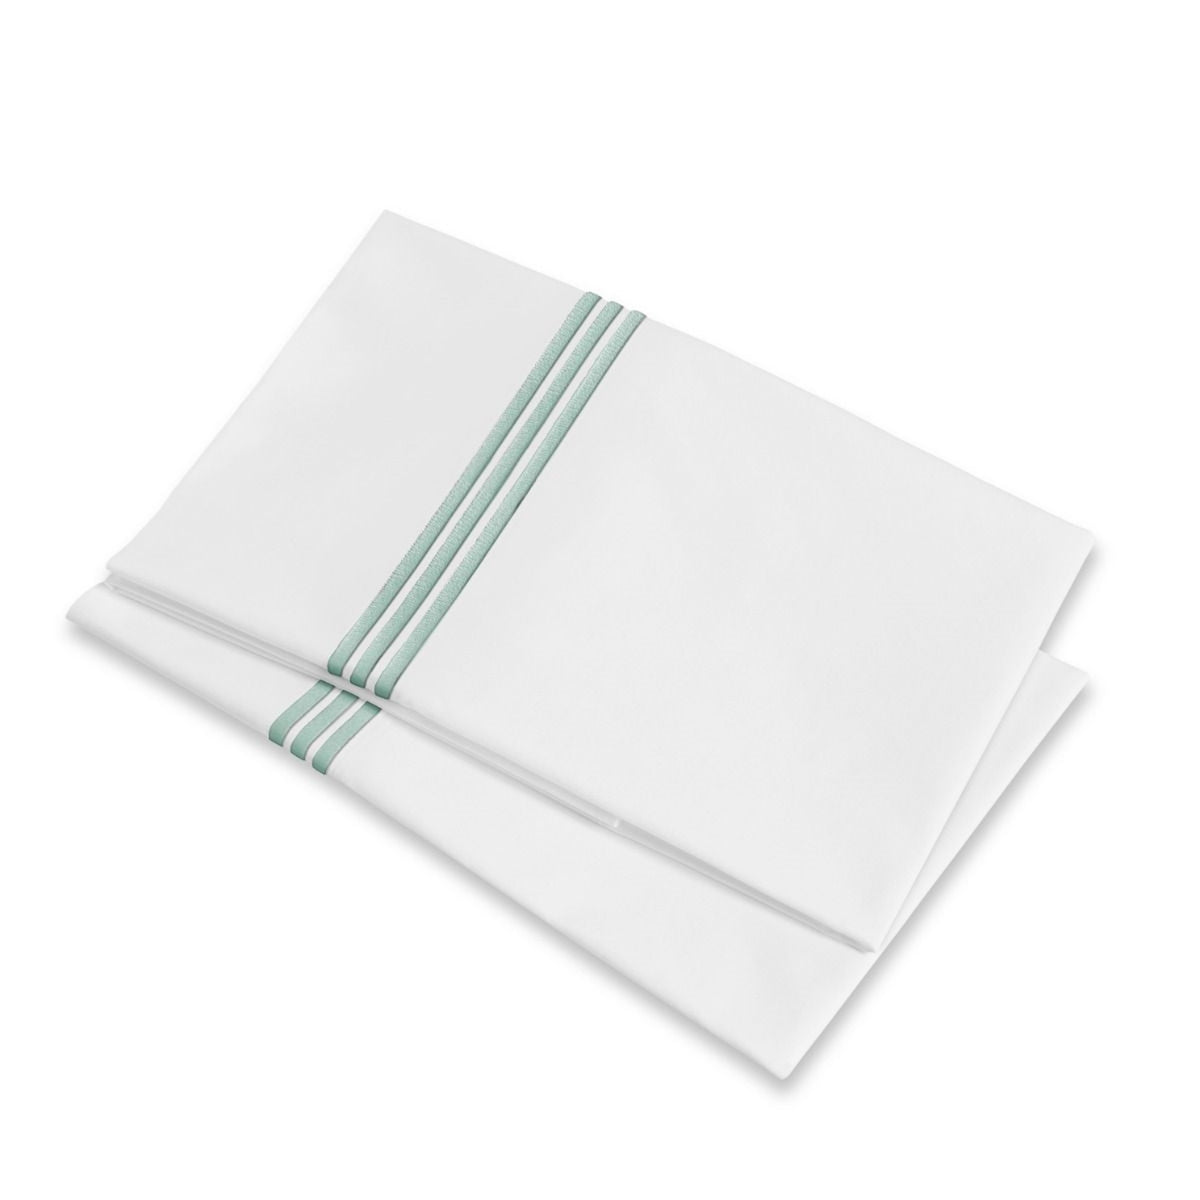 Folded Pillowcases of Signoria Platinum Percale Bedding in White/Silver Sage Color